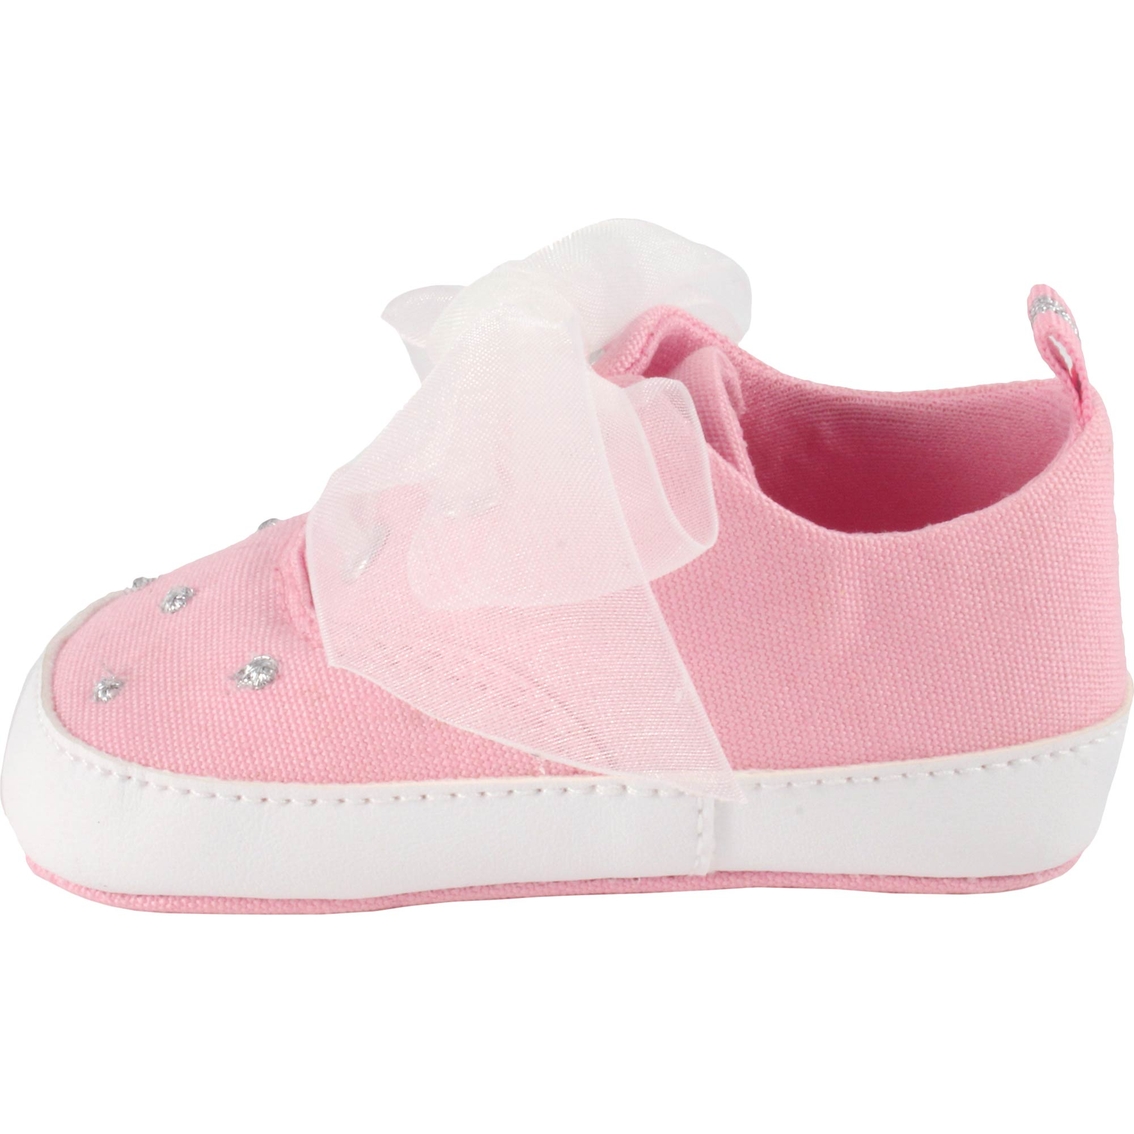 Wee Kids Infant Girls Lace Up Sneakers - Image 2 of 4